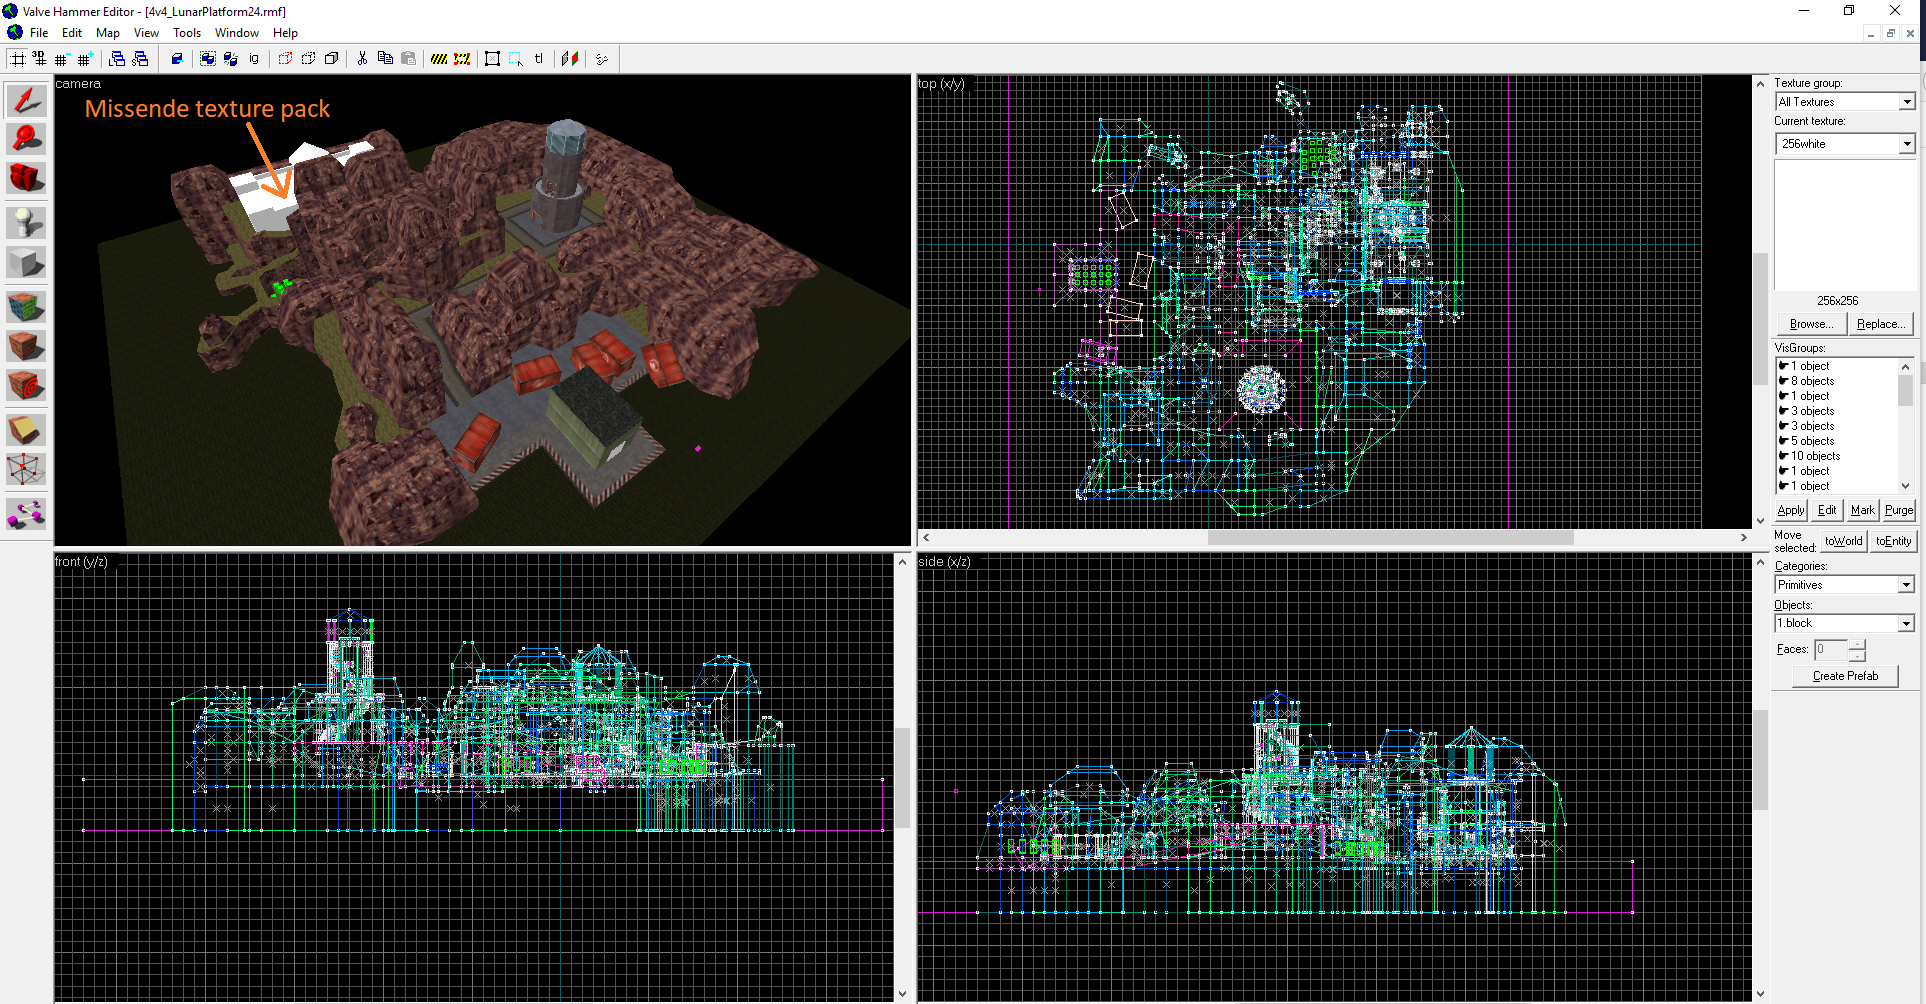 Screen-shot of the mapping design for the Port map.